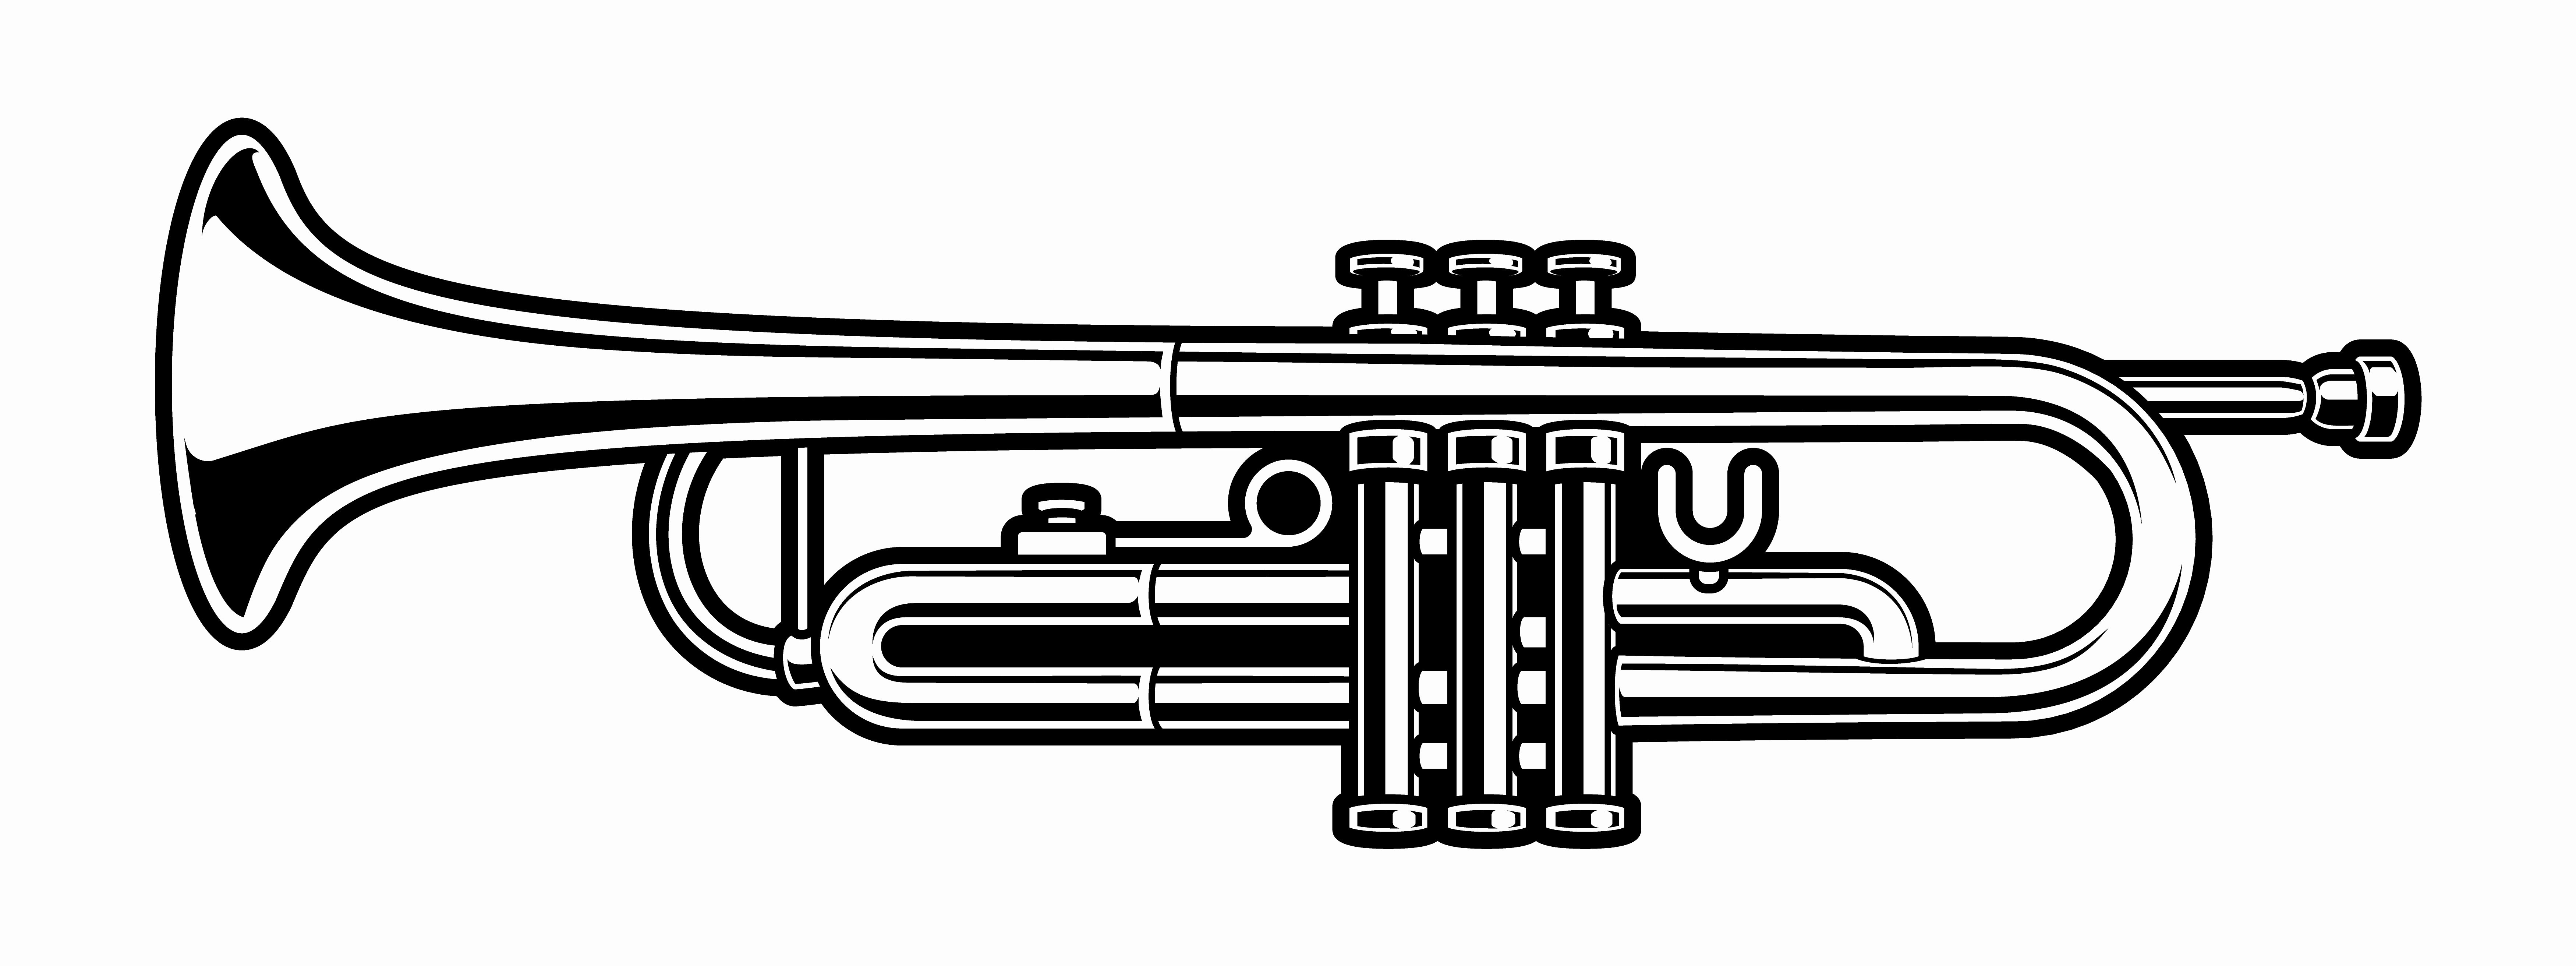 Black and White Illustration New Black and White Illustration Of Trumpet Download Free